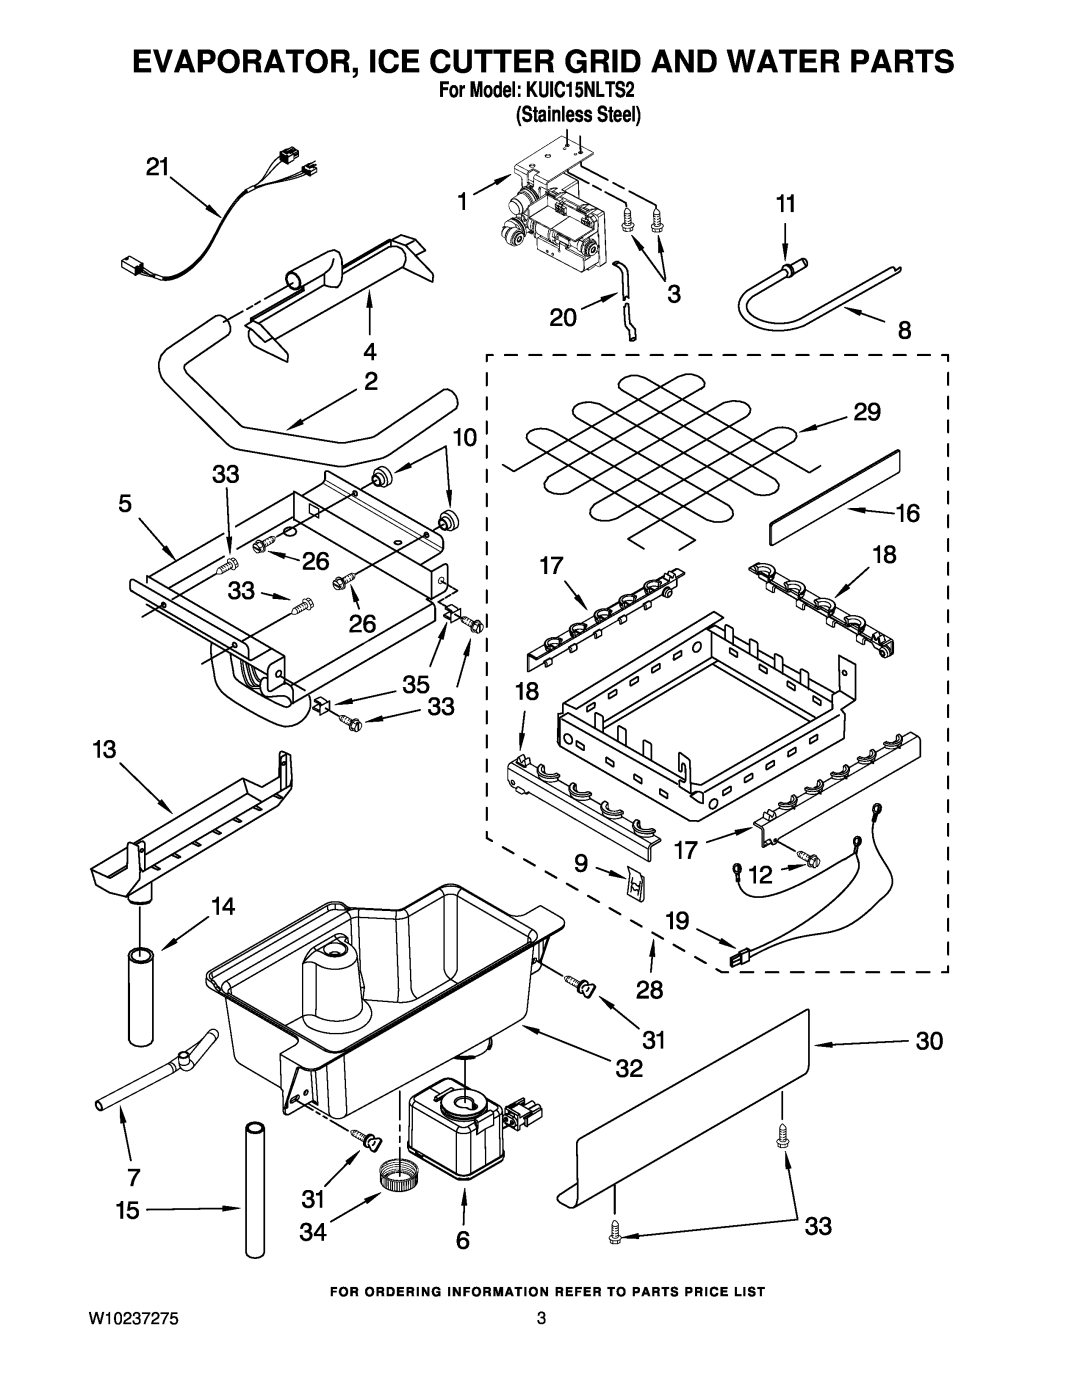 KitchenAid manual Evaporator, Ice Cutter Grid And Water Parts, W10237275, For Model KUIC15NLTS2 Stainless Steel 